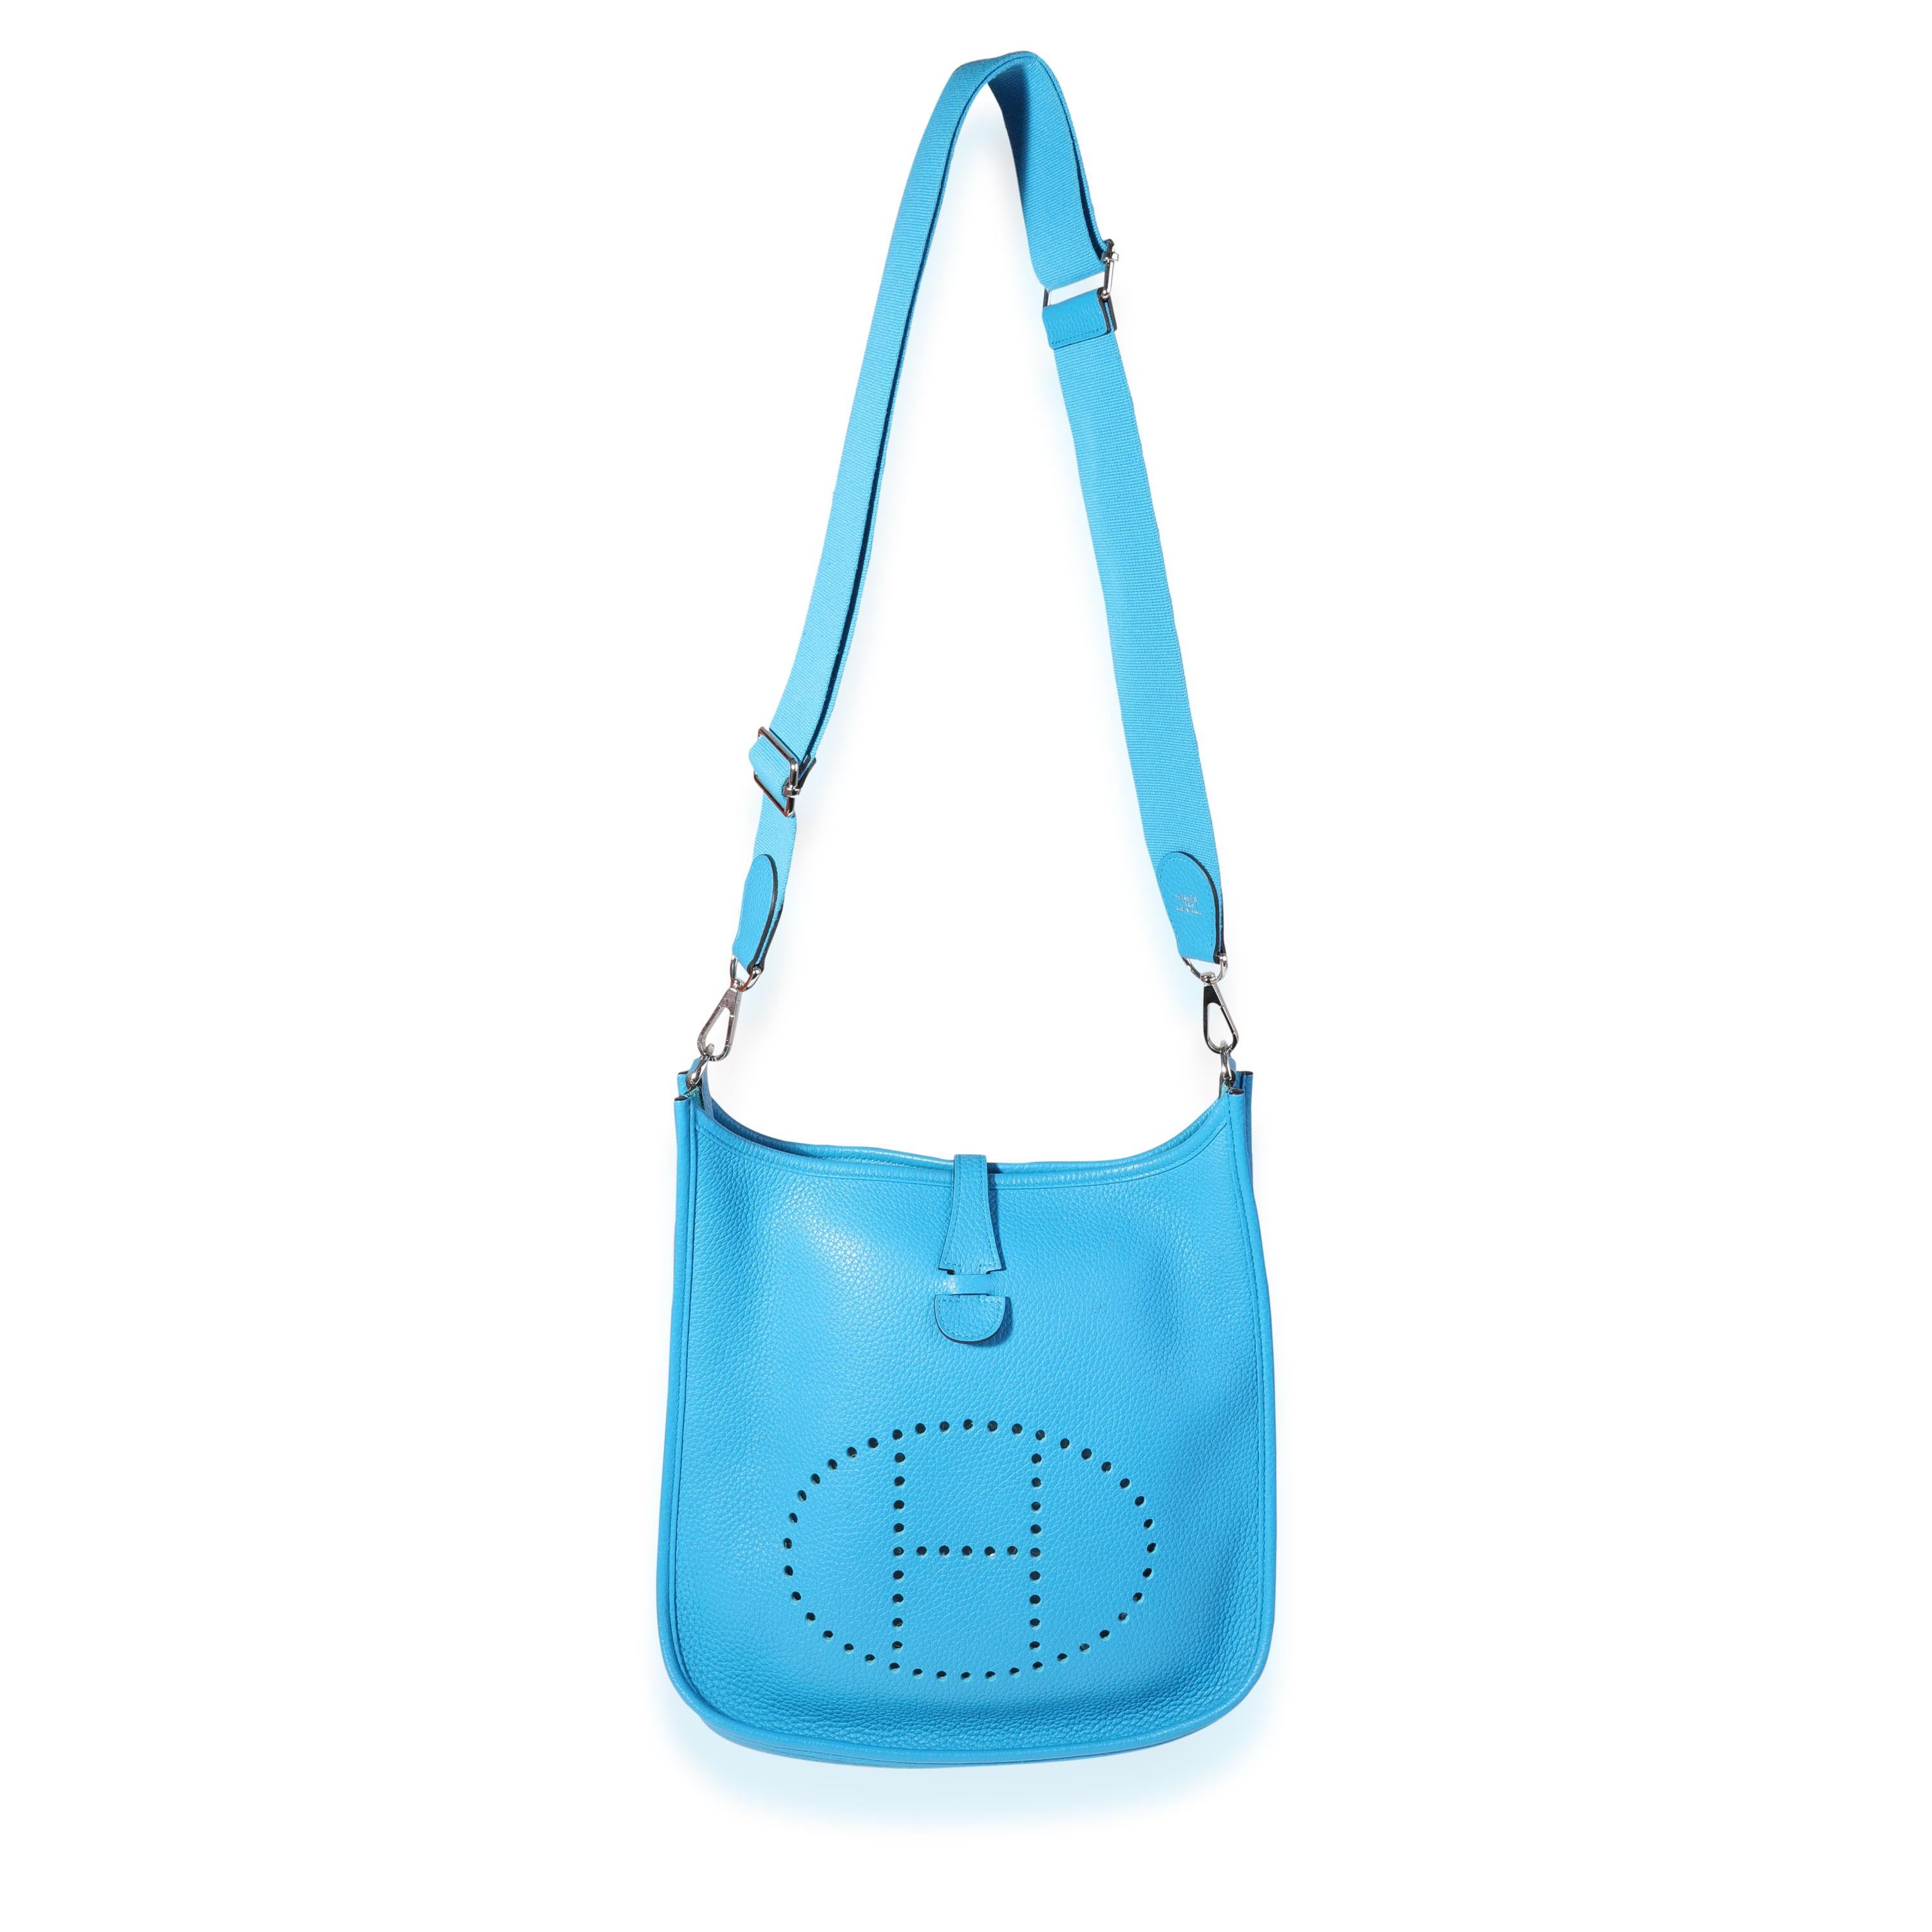 Listing Title: Hermès Bleu Frida Clémence Evelyne III 29 PHW
SKU: 119503
MSRP: 3475.00
Condition: Pre-owned (3000)
Handbag Condition: Very Good
Condition Comments: Very Good Condition. Mark to front of bag. Scratching and tarnishing to hardware.